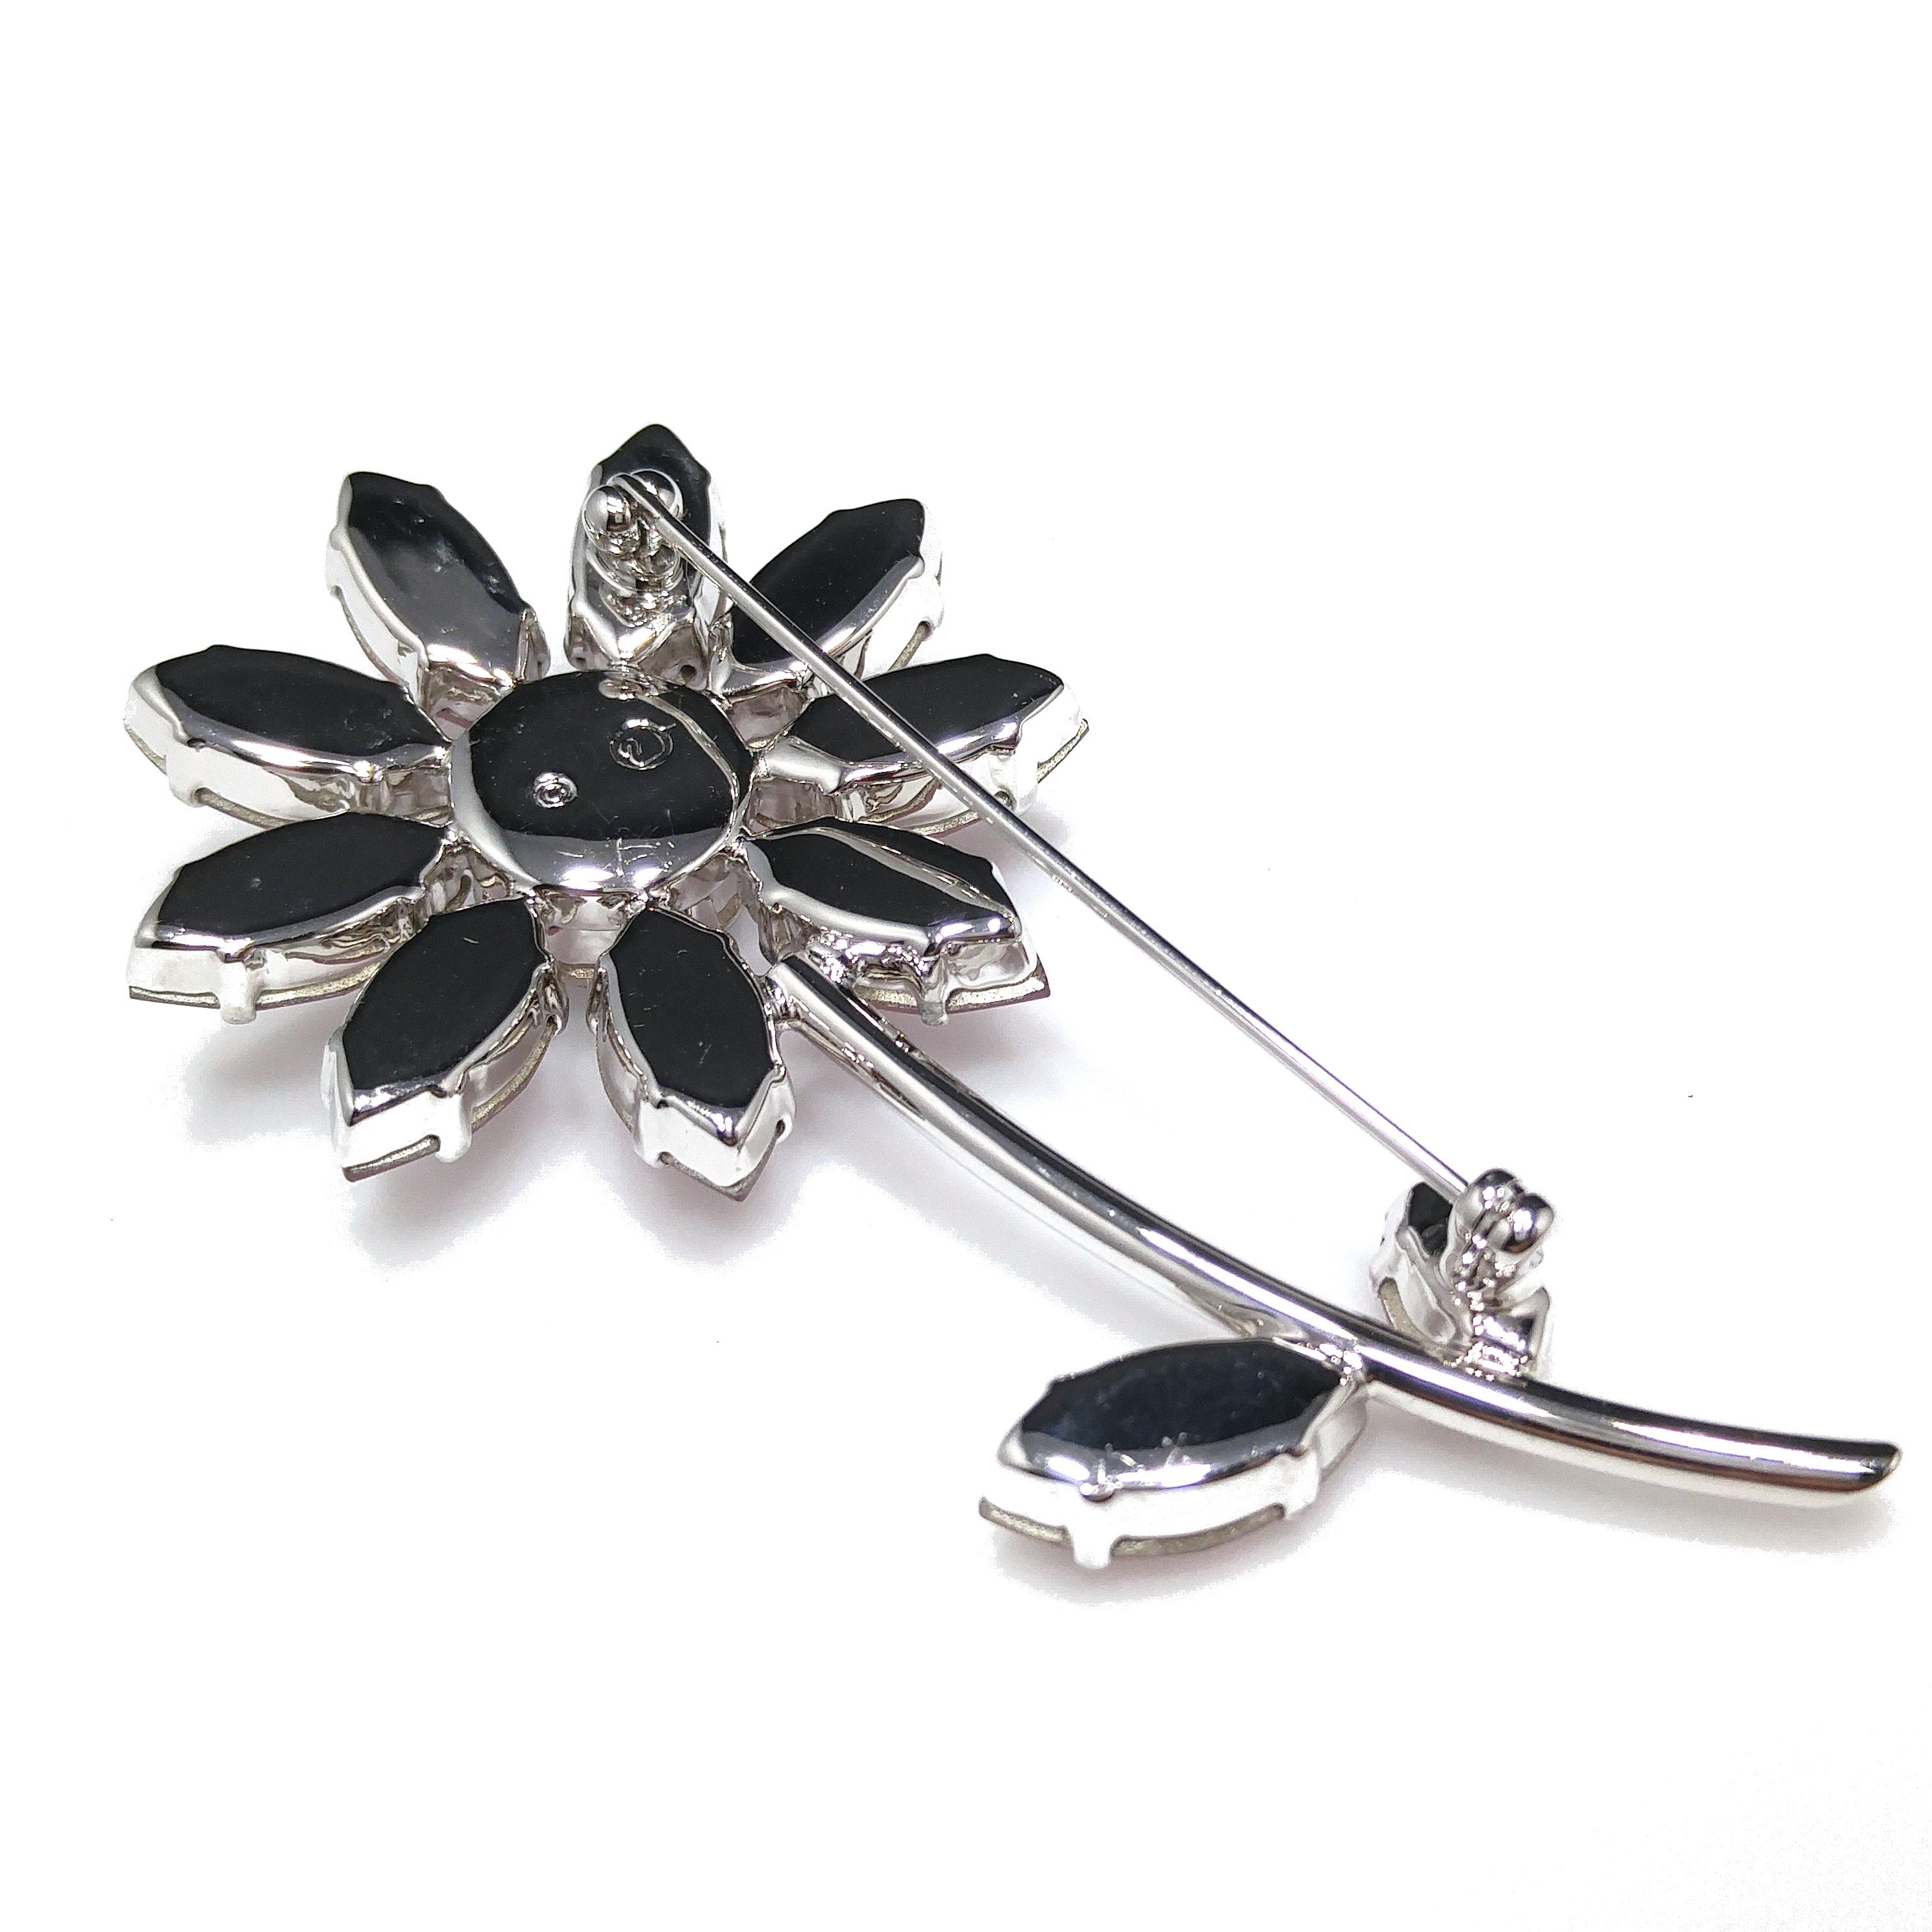 Lonkiktik 3 Pieces Crystal Flower Safety Decorative Pins Brooch Clip Clasp  Pin for Clothing Scarves Shawl Buttons